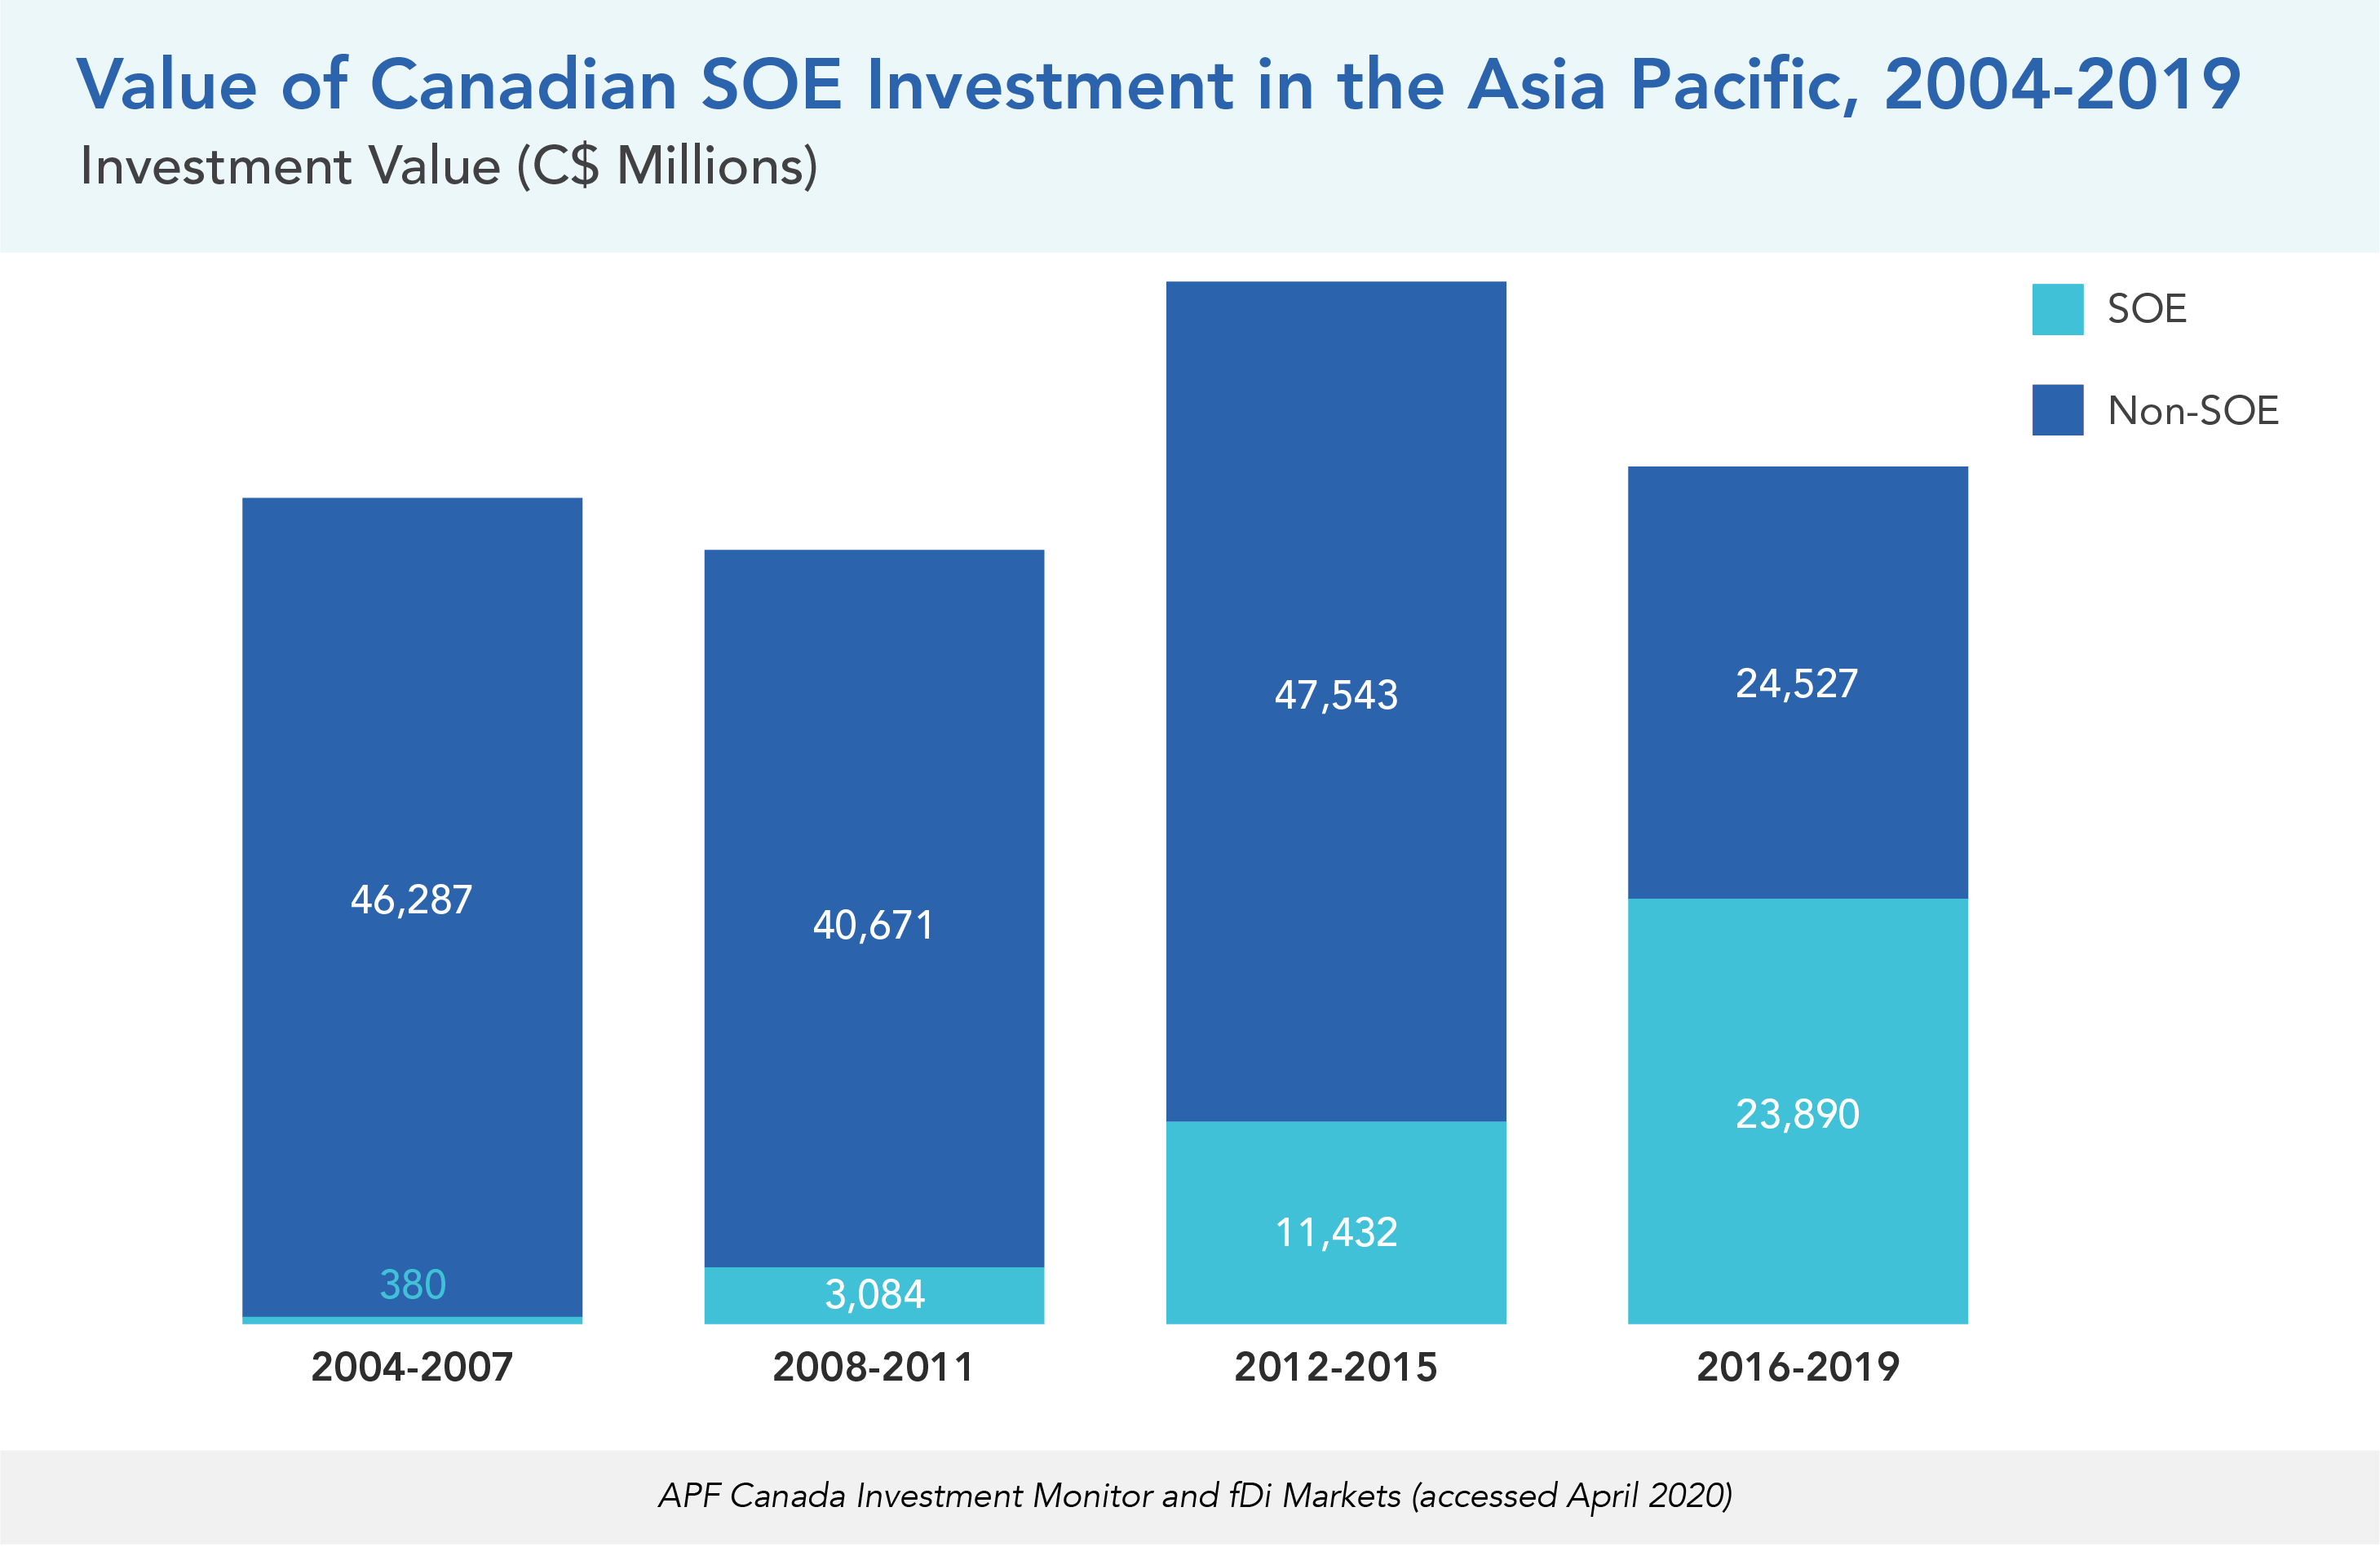 Value of Canadian SOE Investment in the Asia Pacific, 2004-2019